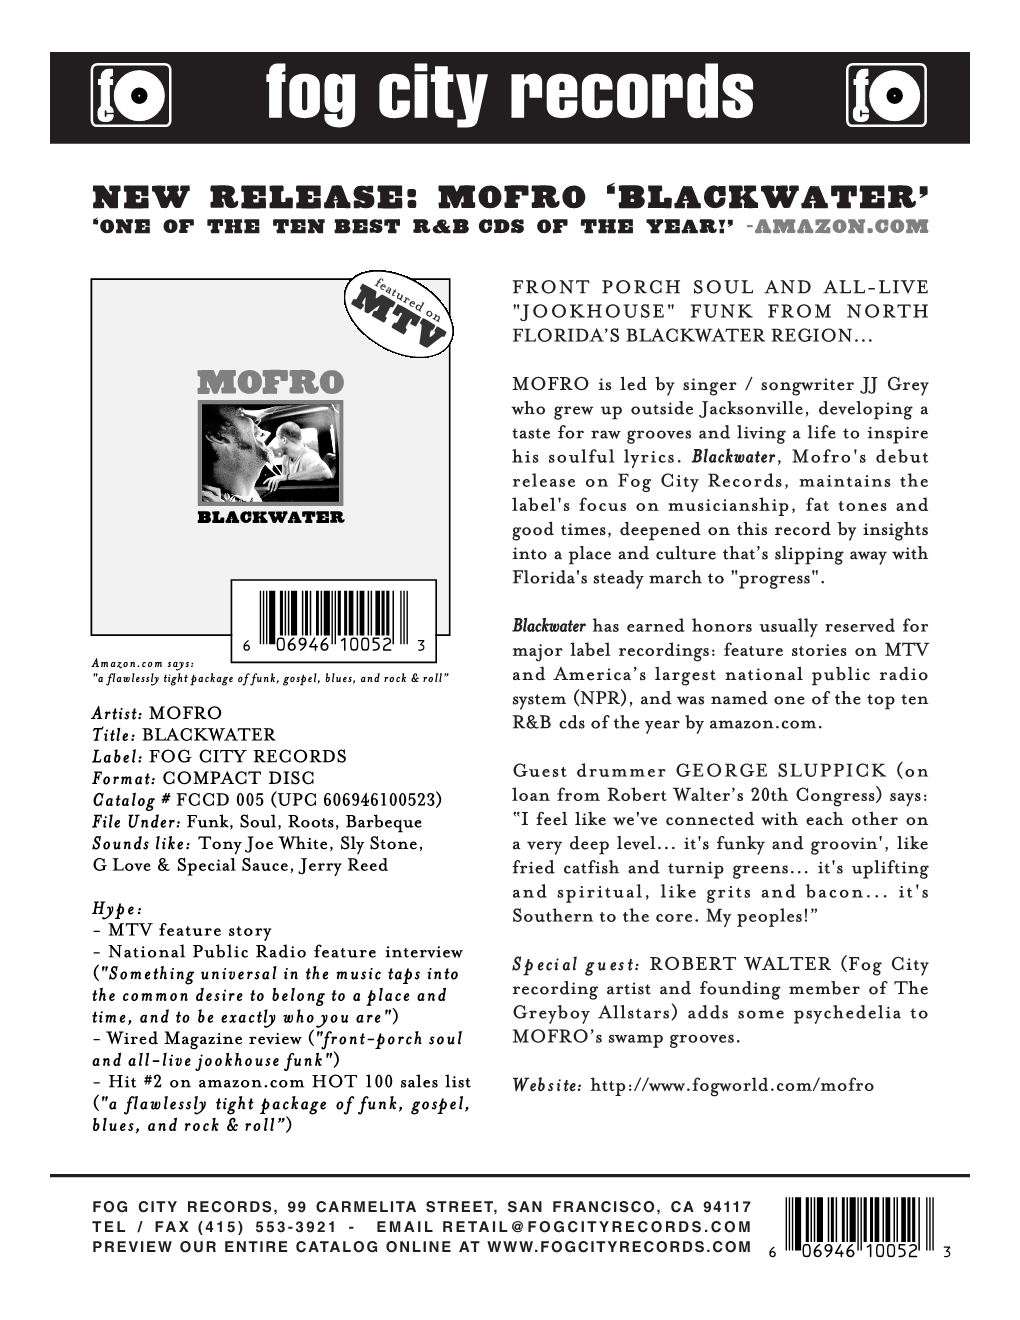 Mofro “Blackwater” “One of the Ten Best R&B Cds of the Year!” -AMAZON.COM